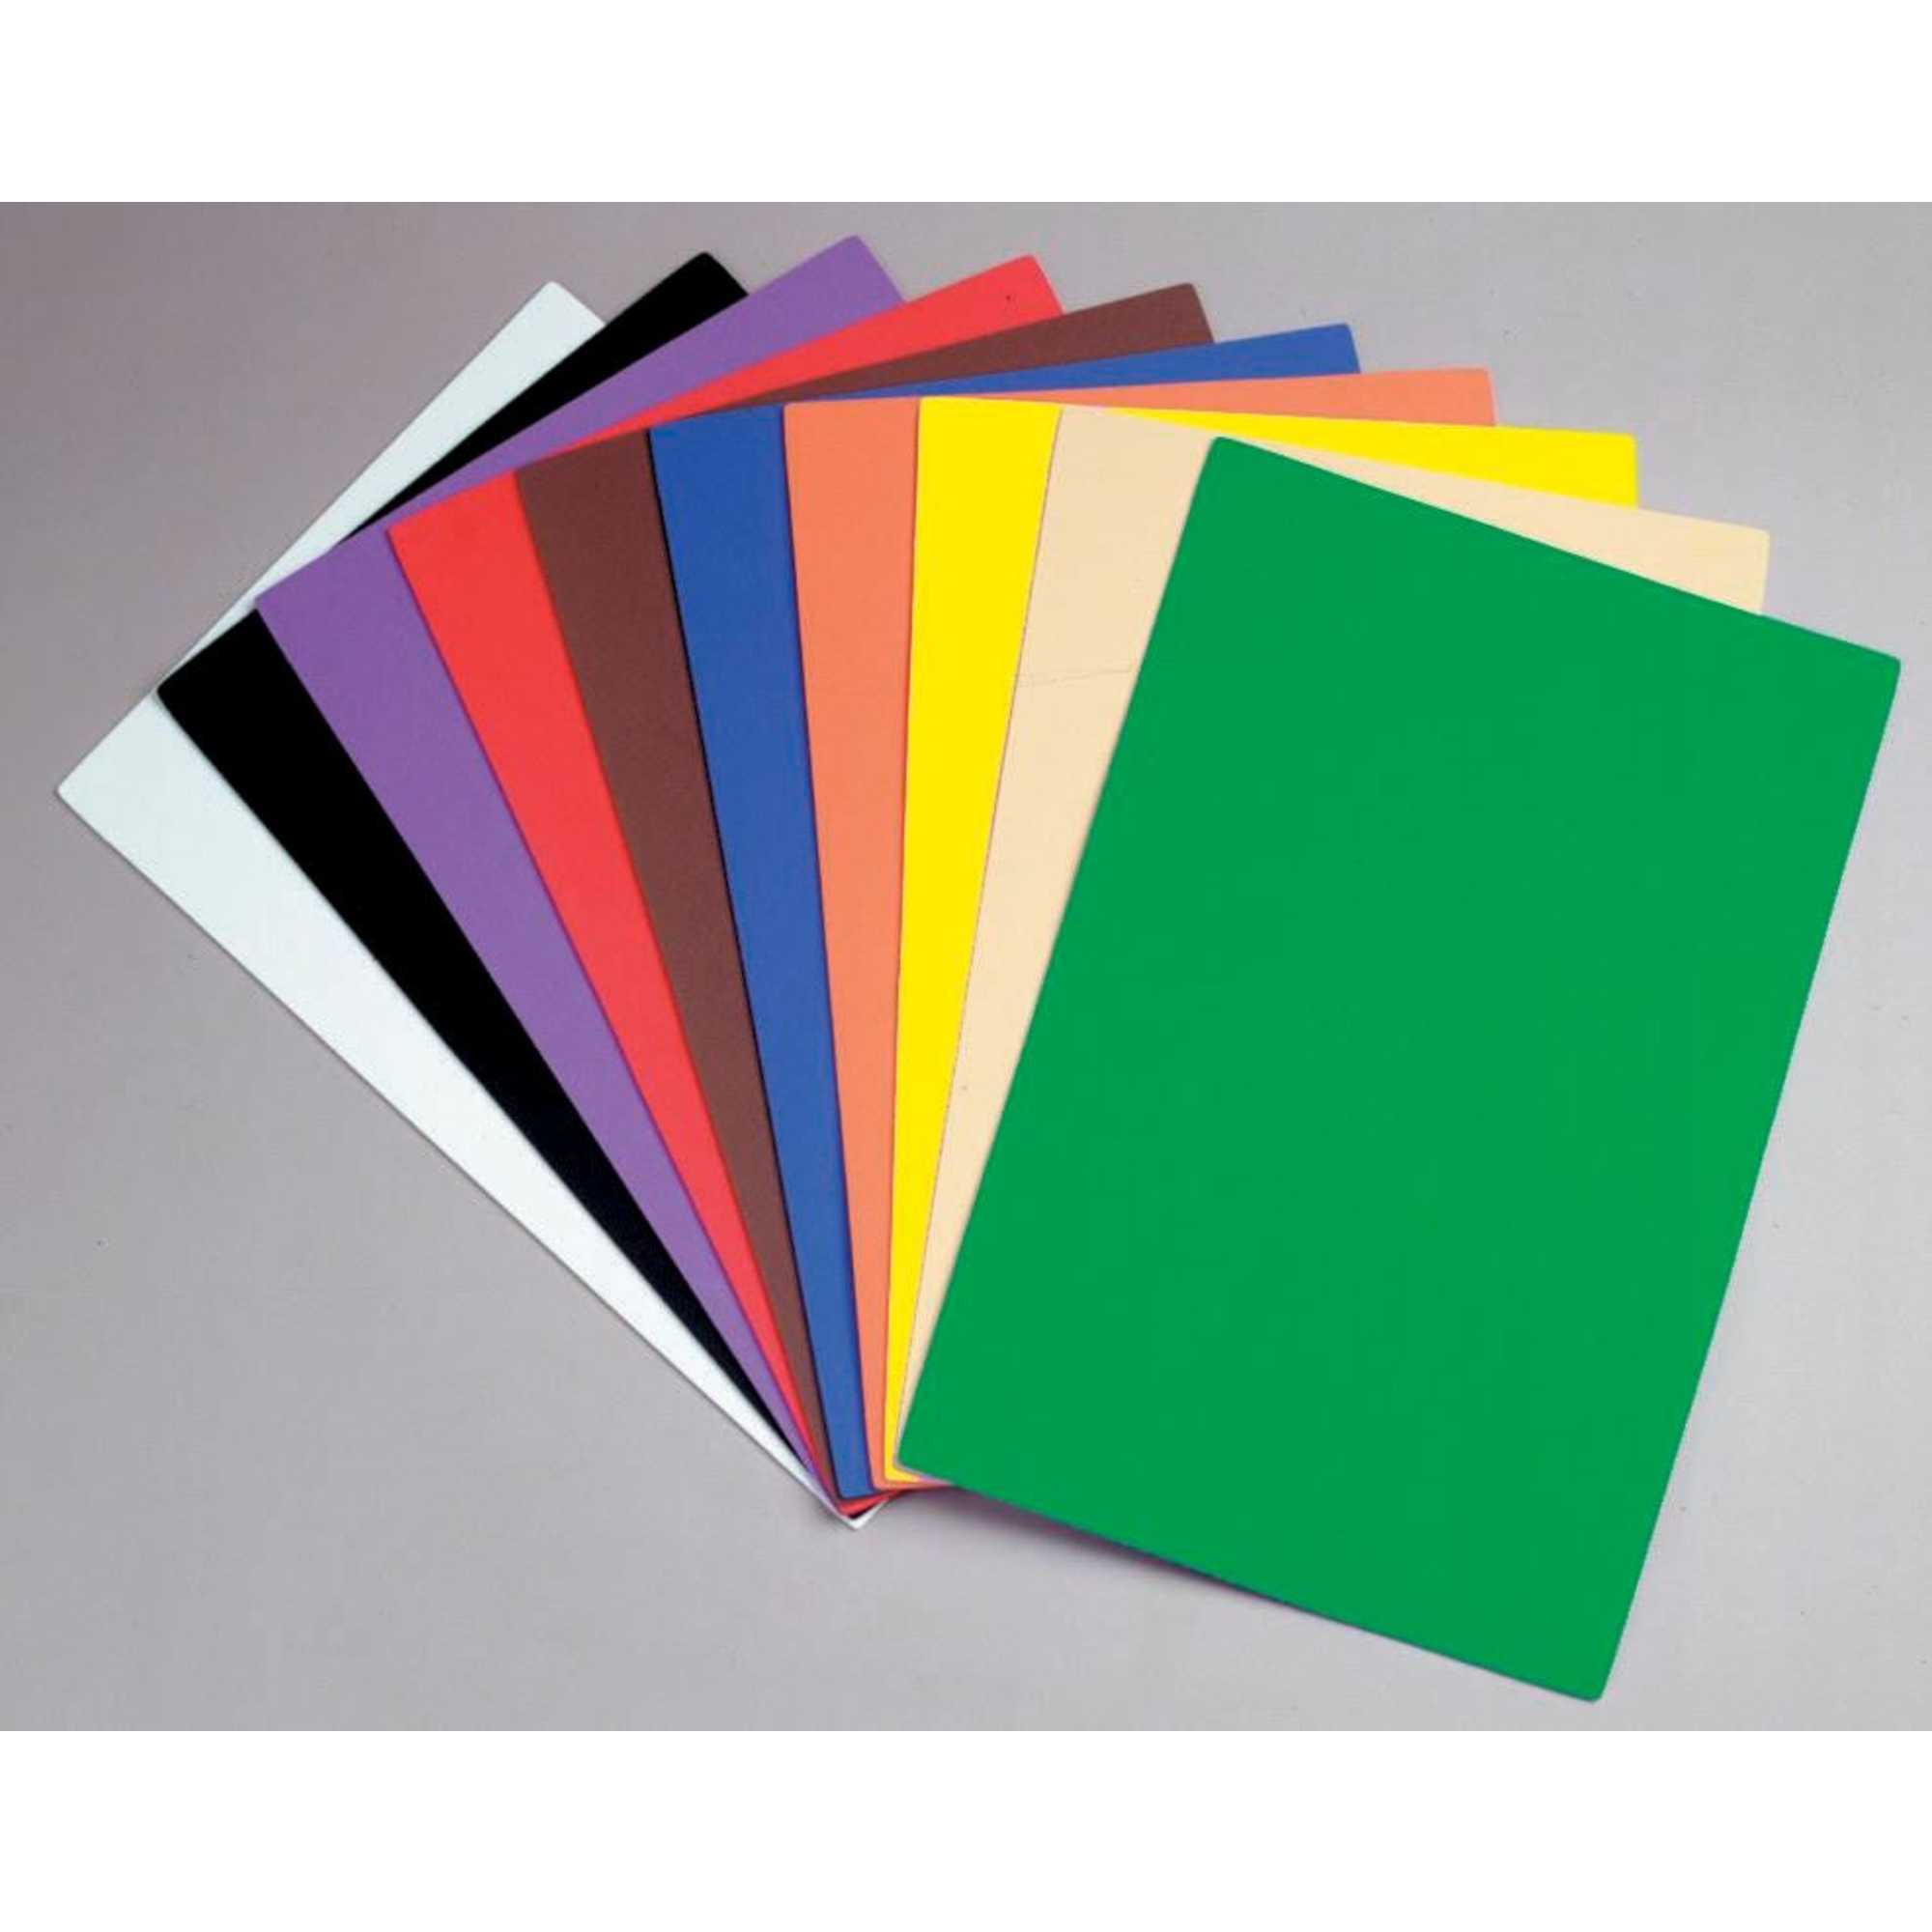 Wonderfoam Non-Toxic Foam Sheet, 9 X 12 in, Assorted Bright Color, Set of 10 - image 1 of 3